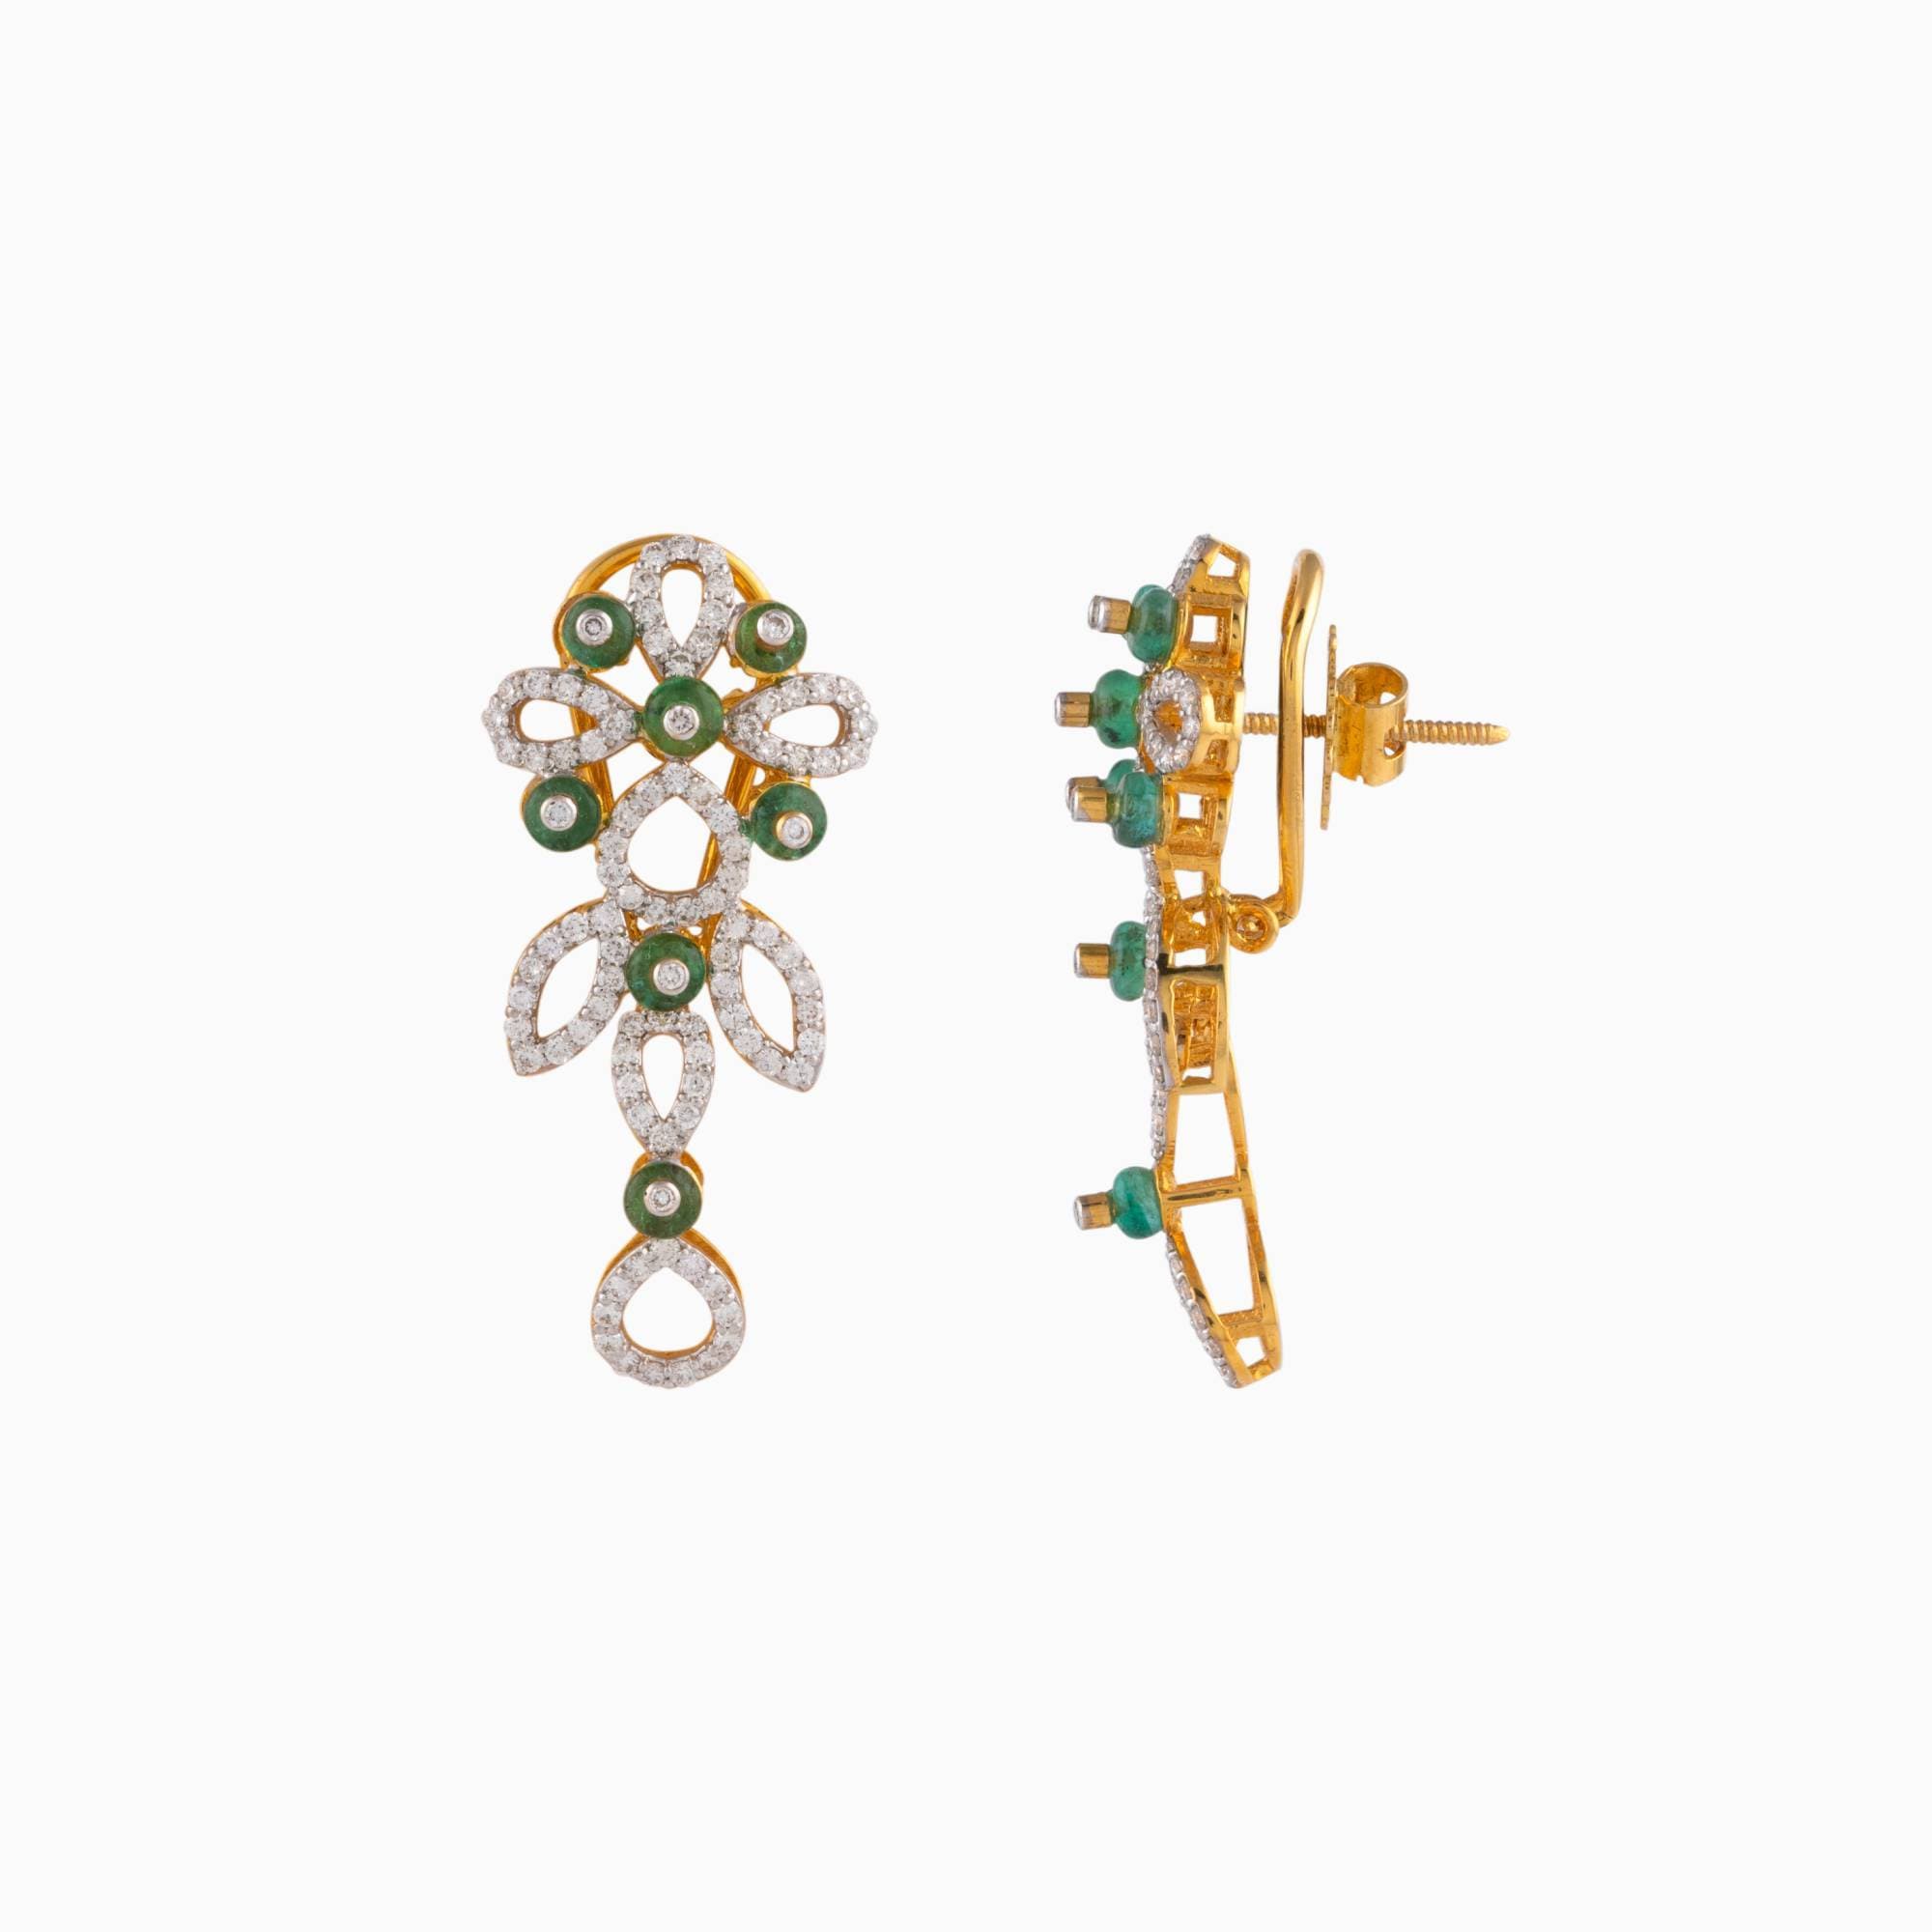 Earring pair with Round Cut Diamond and Fungar Emerald Beads - WDN248